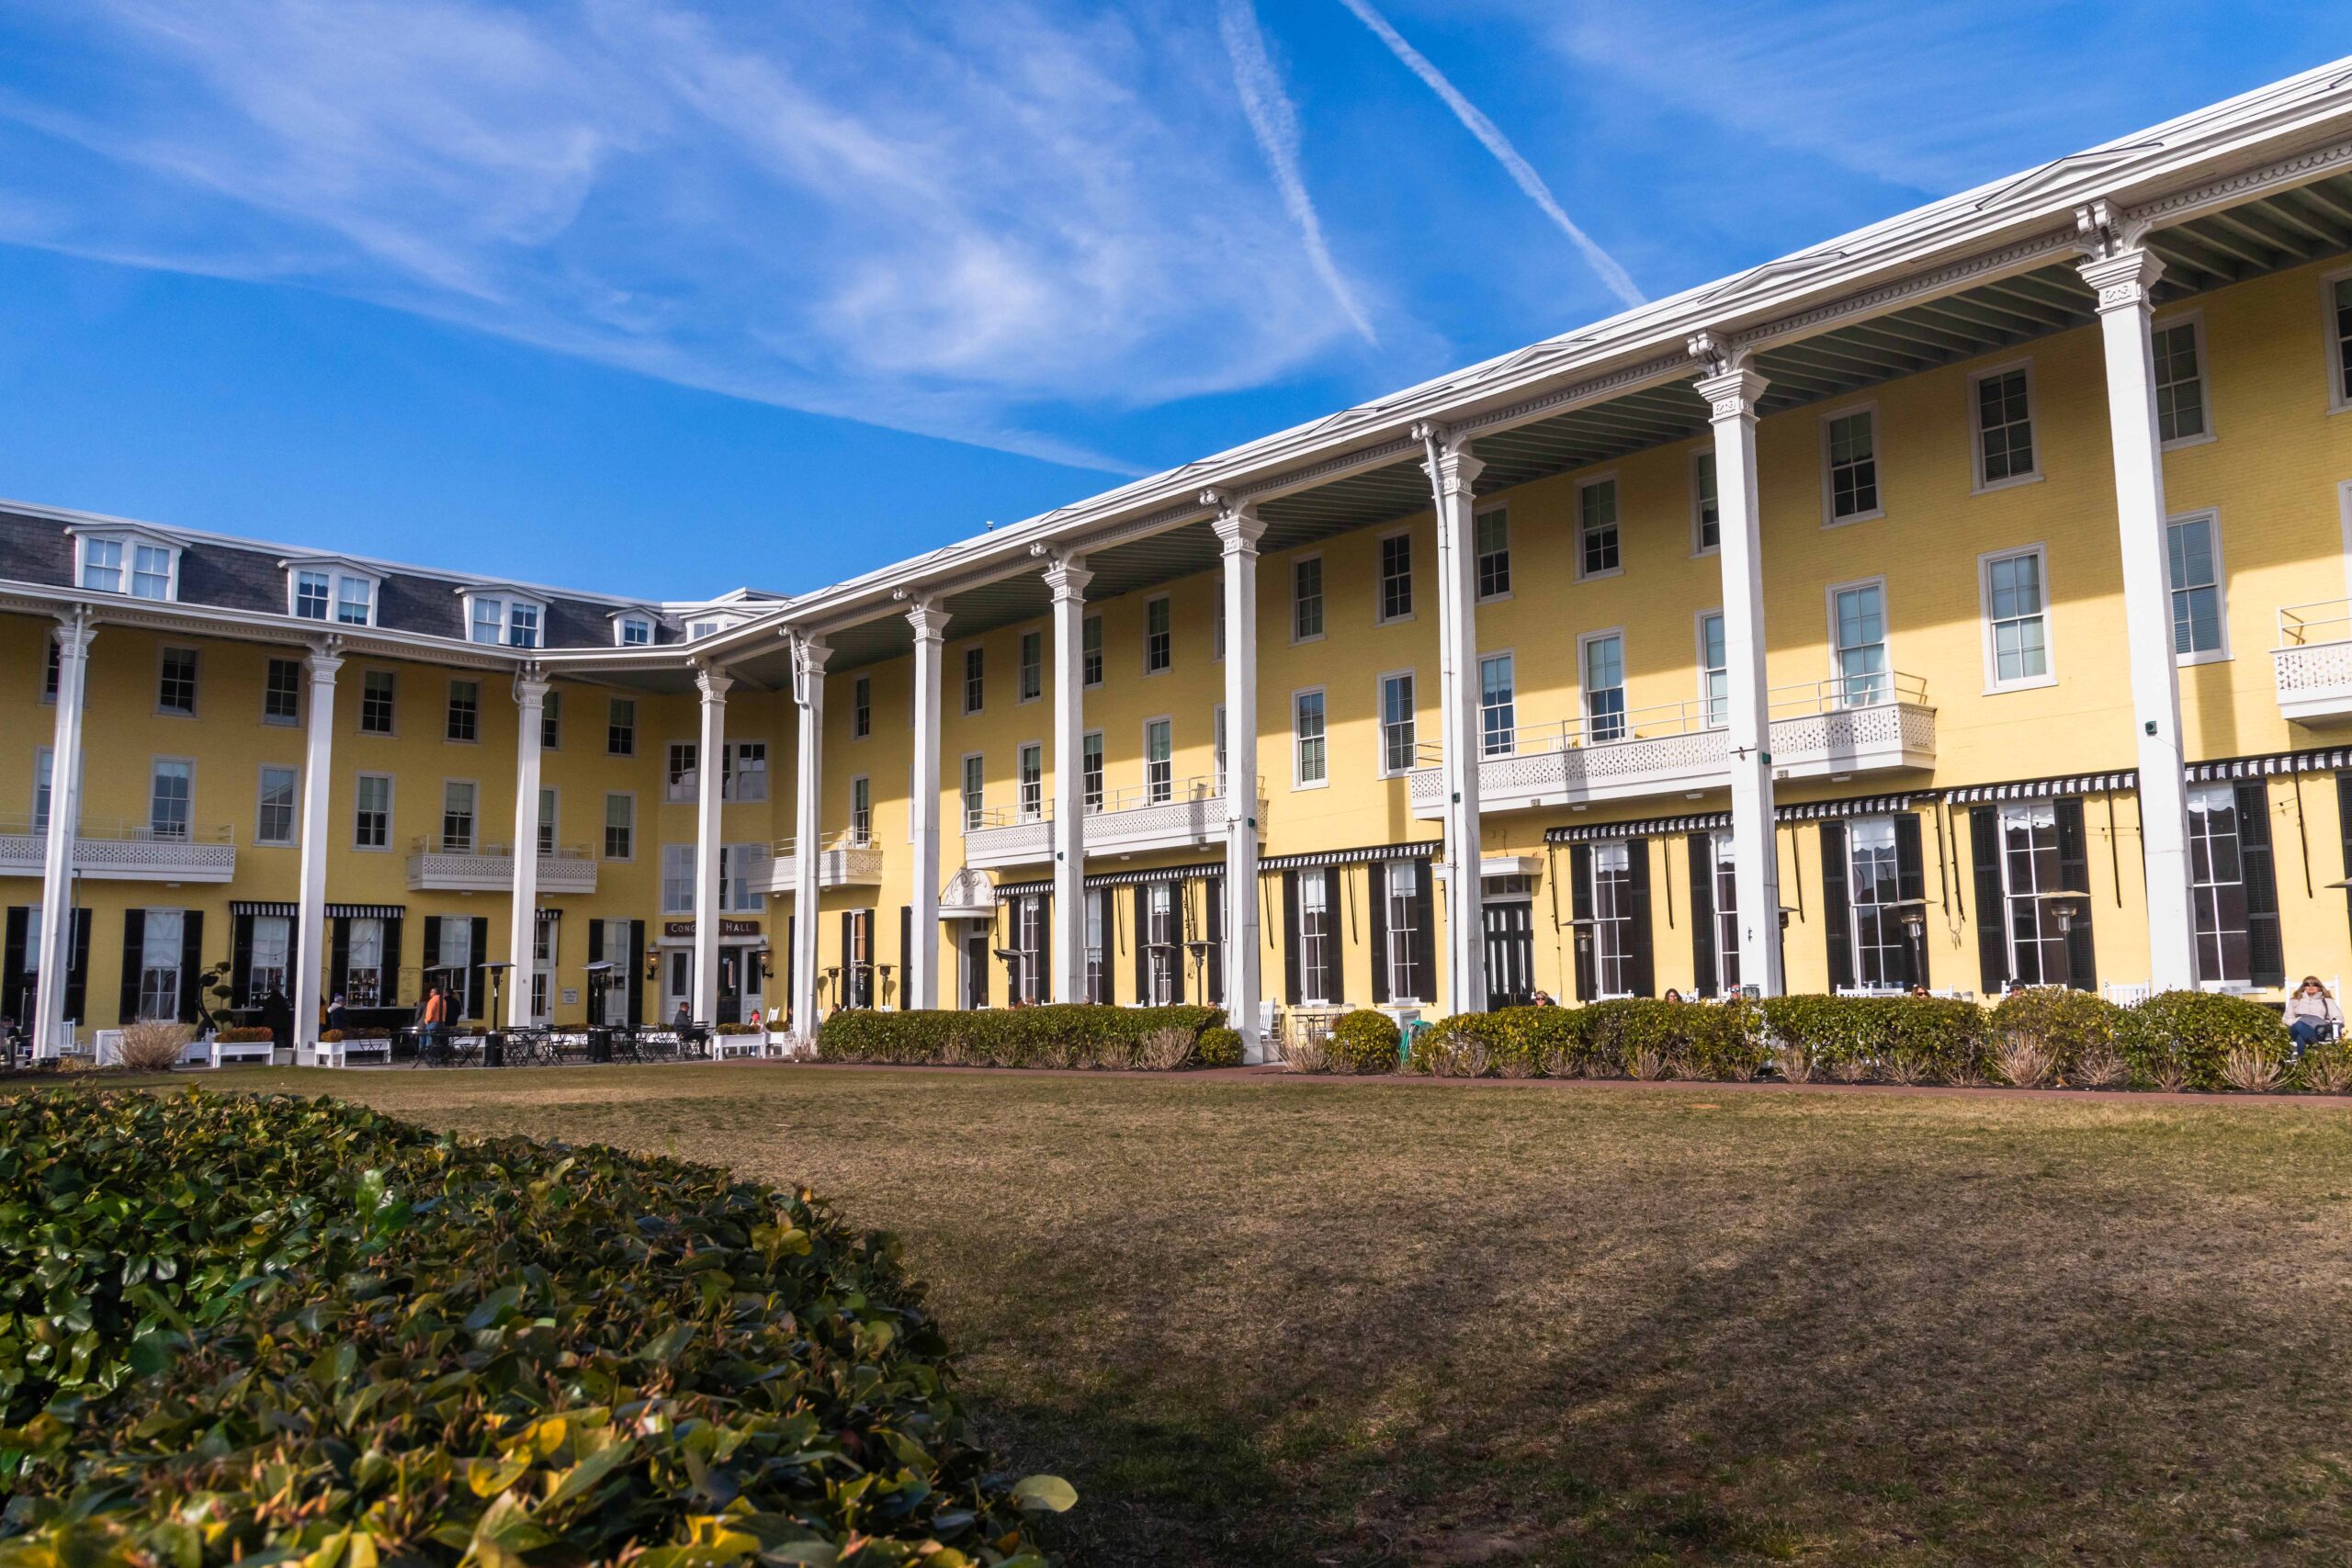 A wide view of Congress Hall with the front lawn and a clear blue sky 